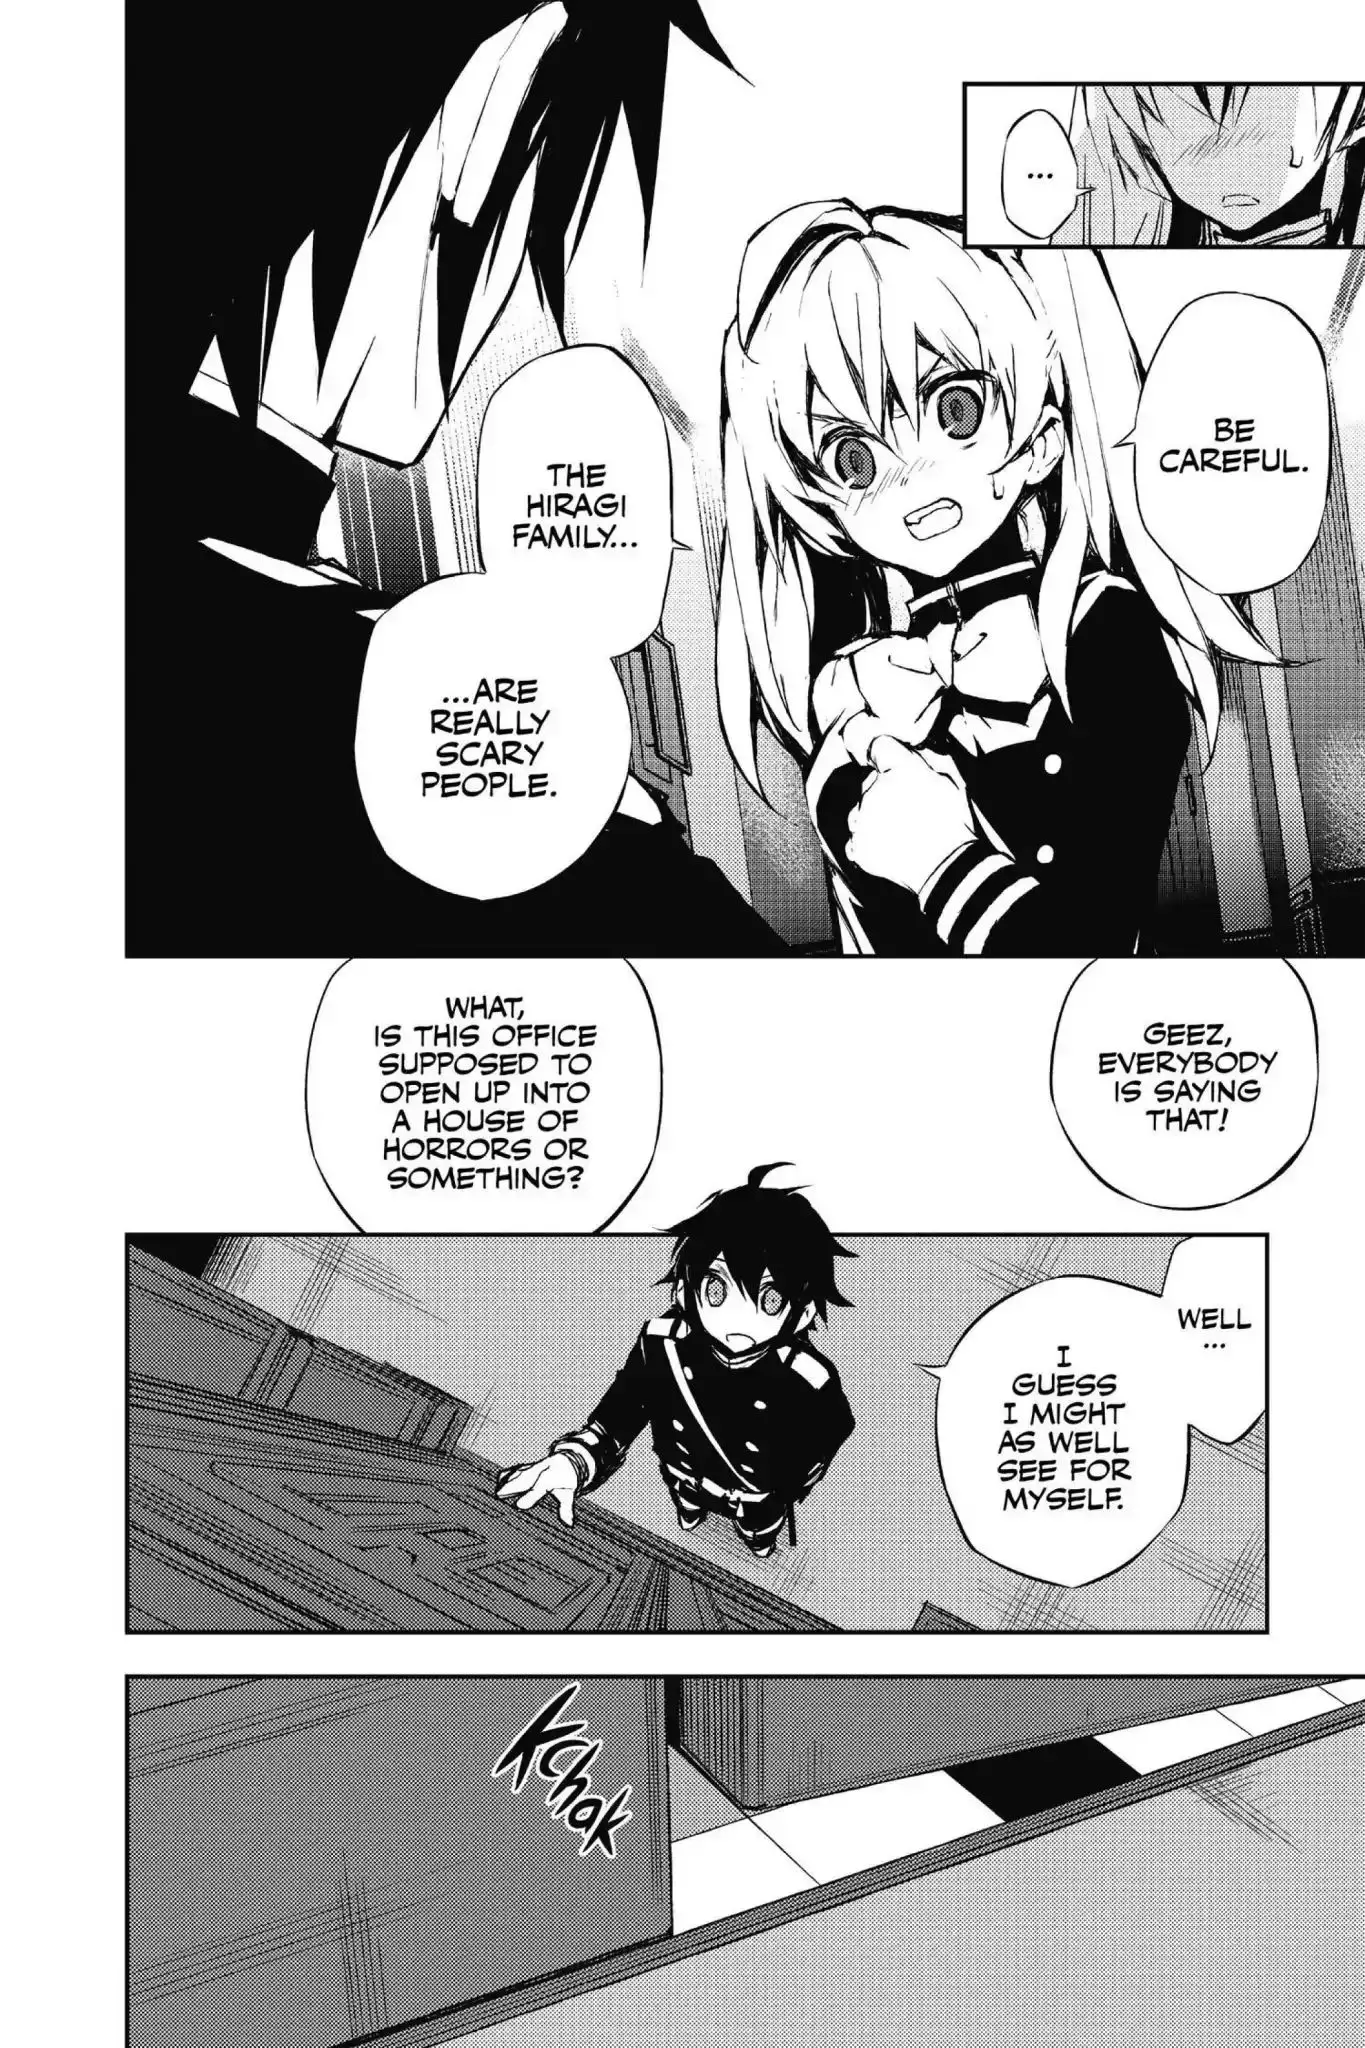 Seraph Of The End - 16 page 39-5ce7c1f9